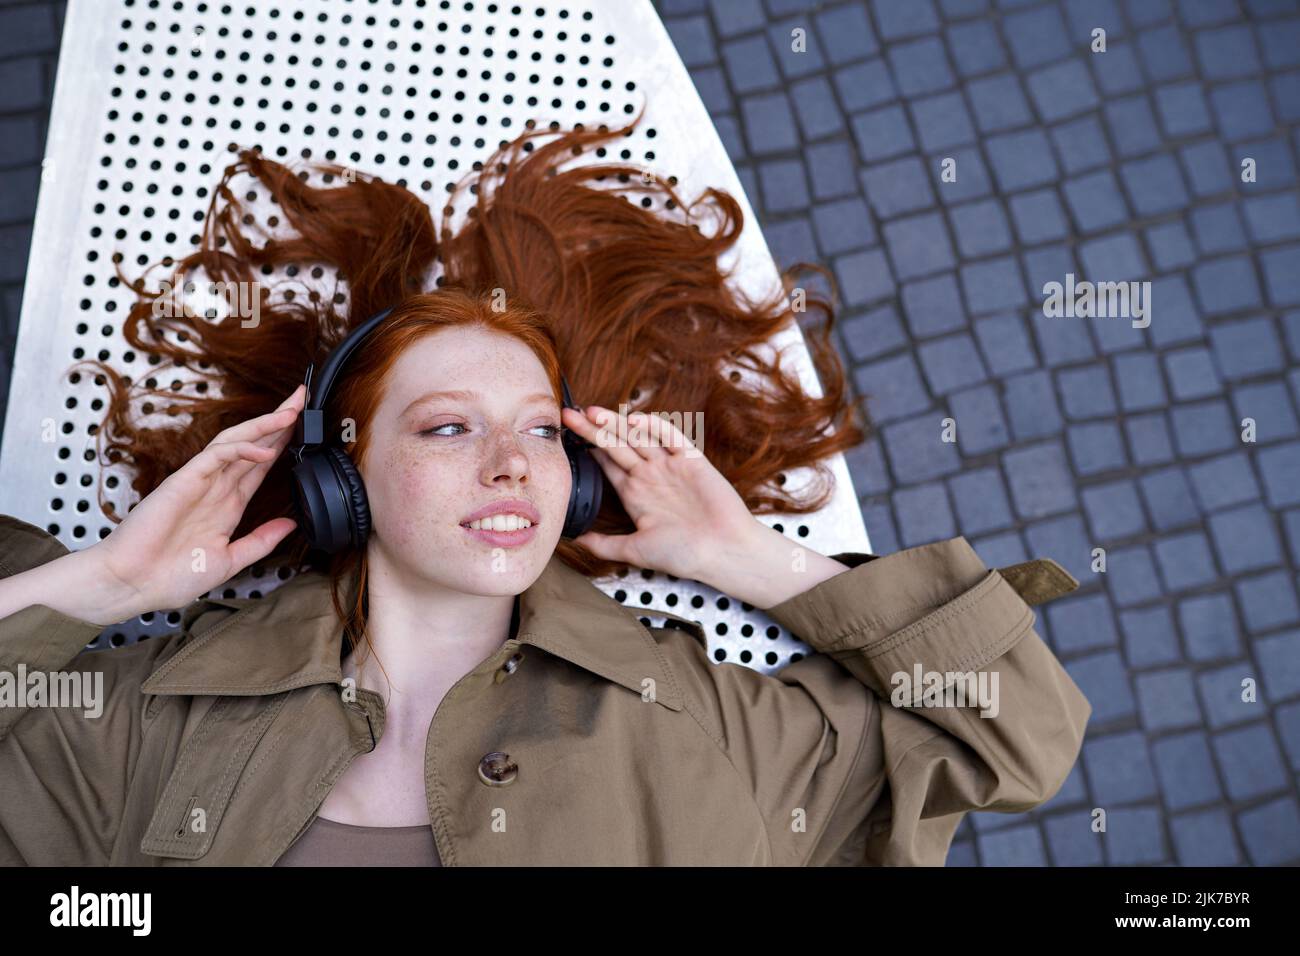 Teen redhead girl wears headphone listening music outdoor looking at copy space. Stock Photo